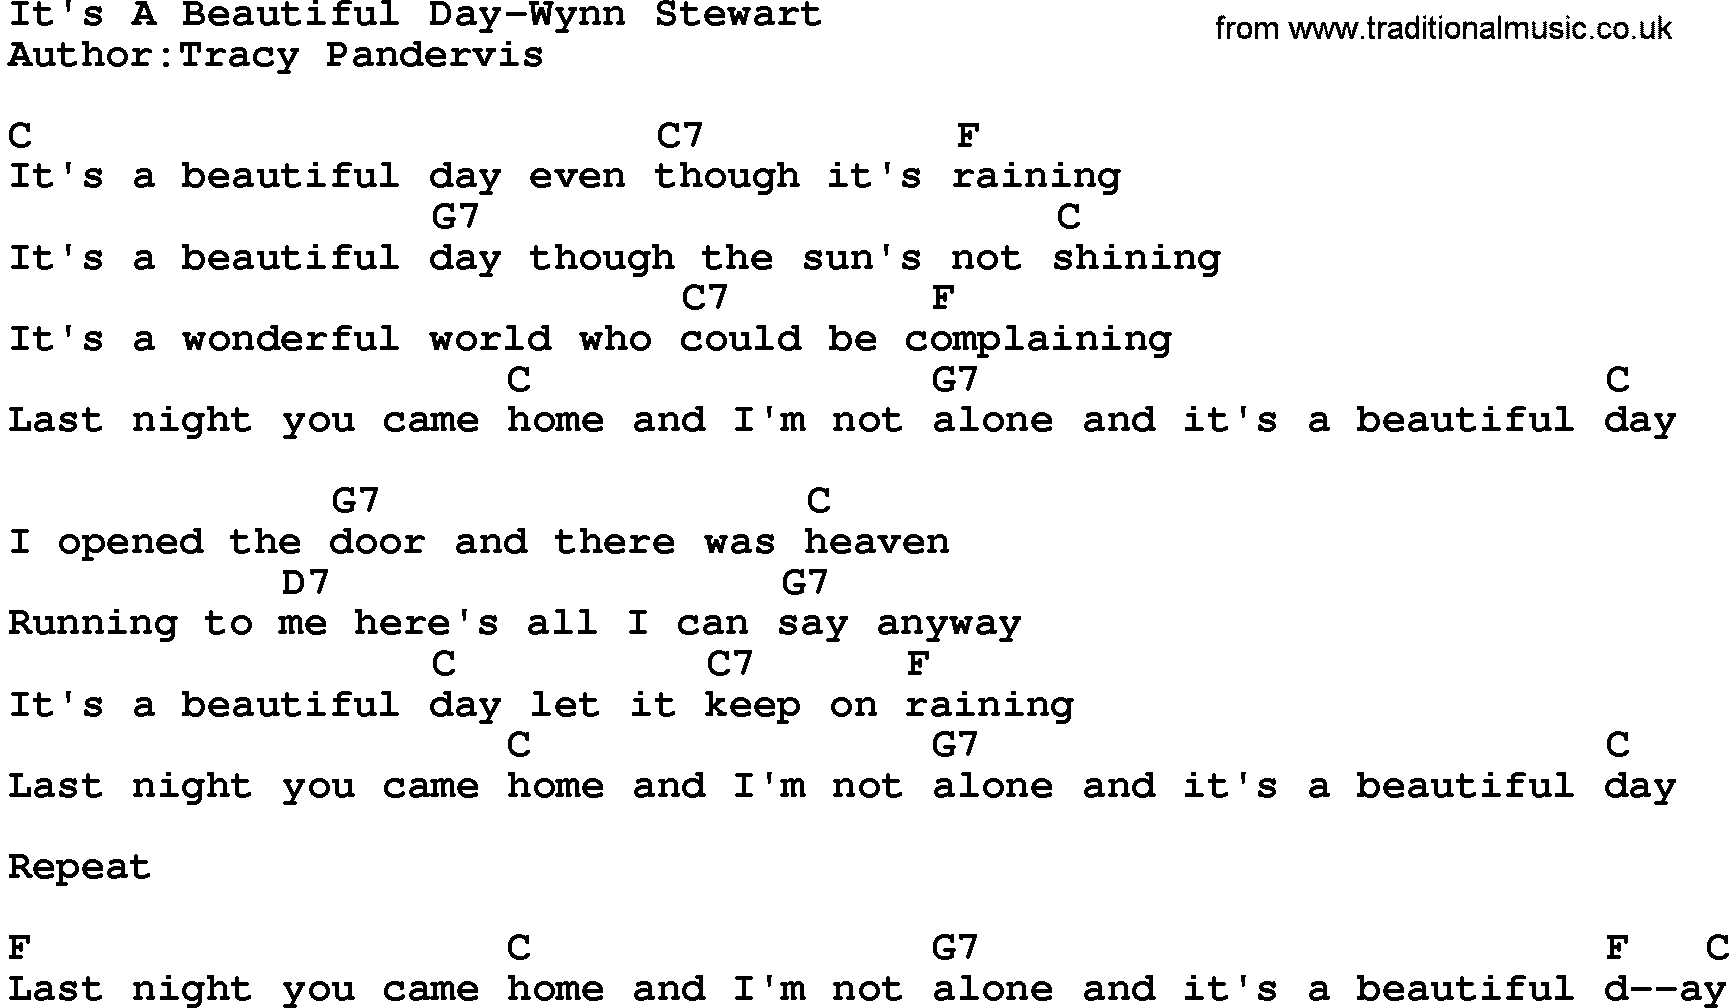 Country music song: It's A Beautiful Day-Wynn Stewart lyrics and chords